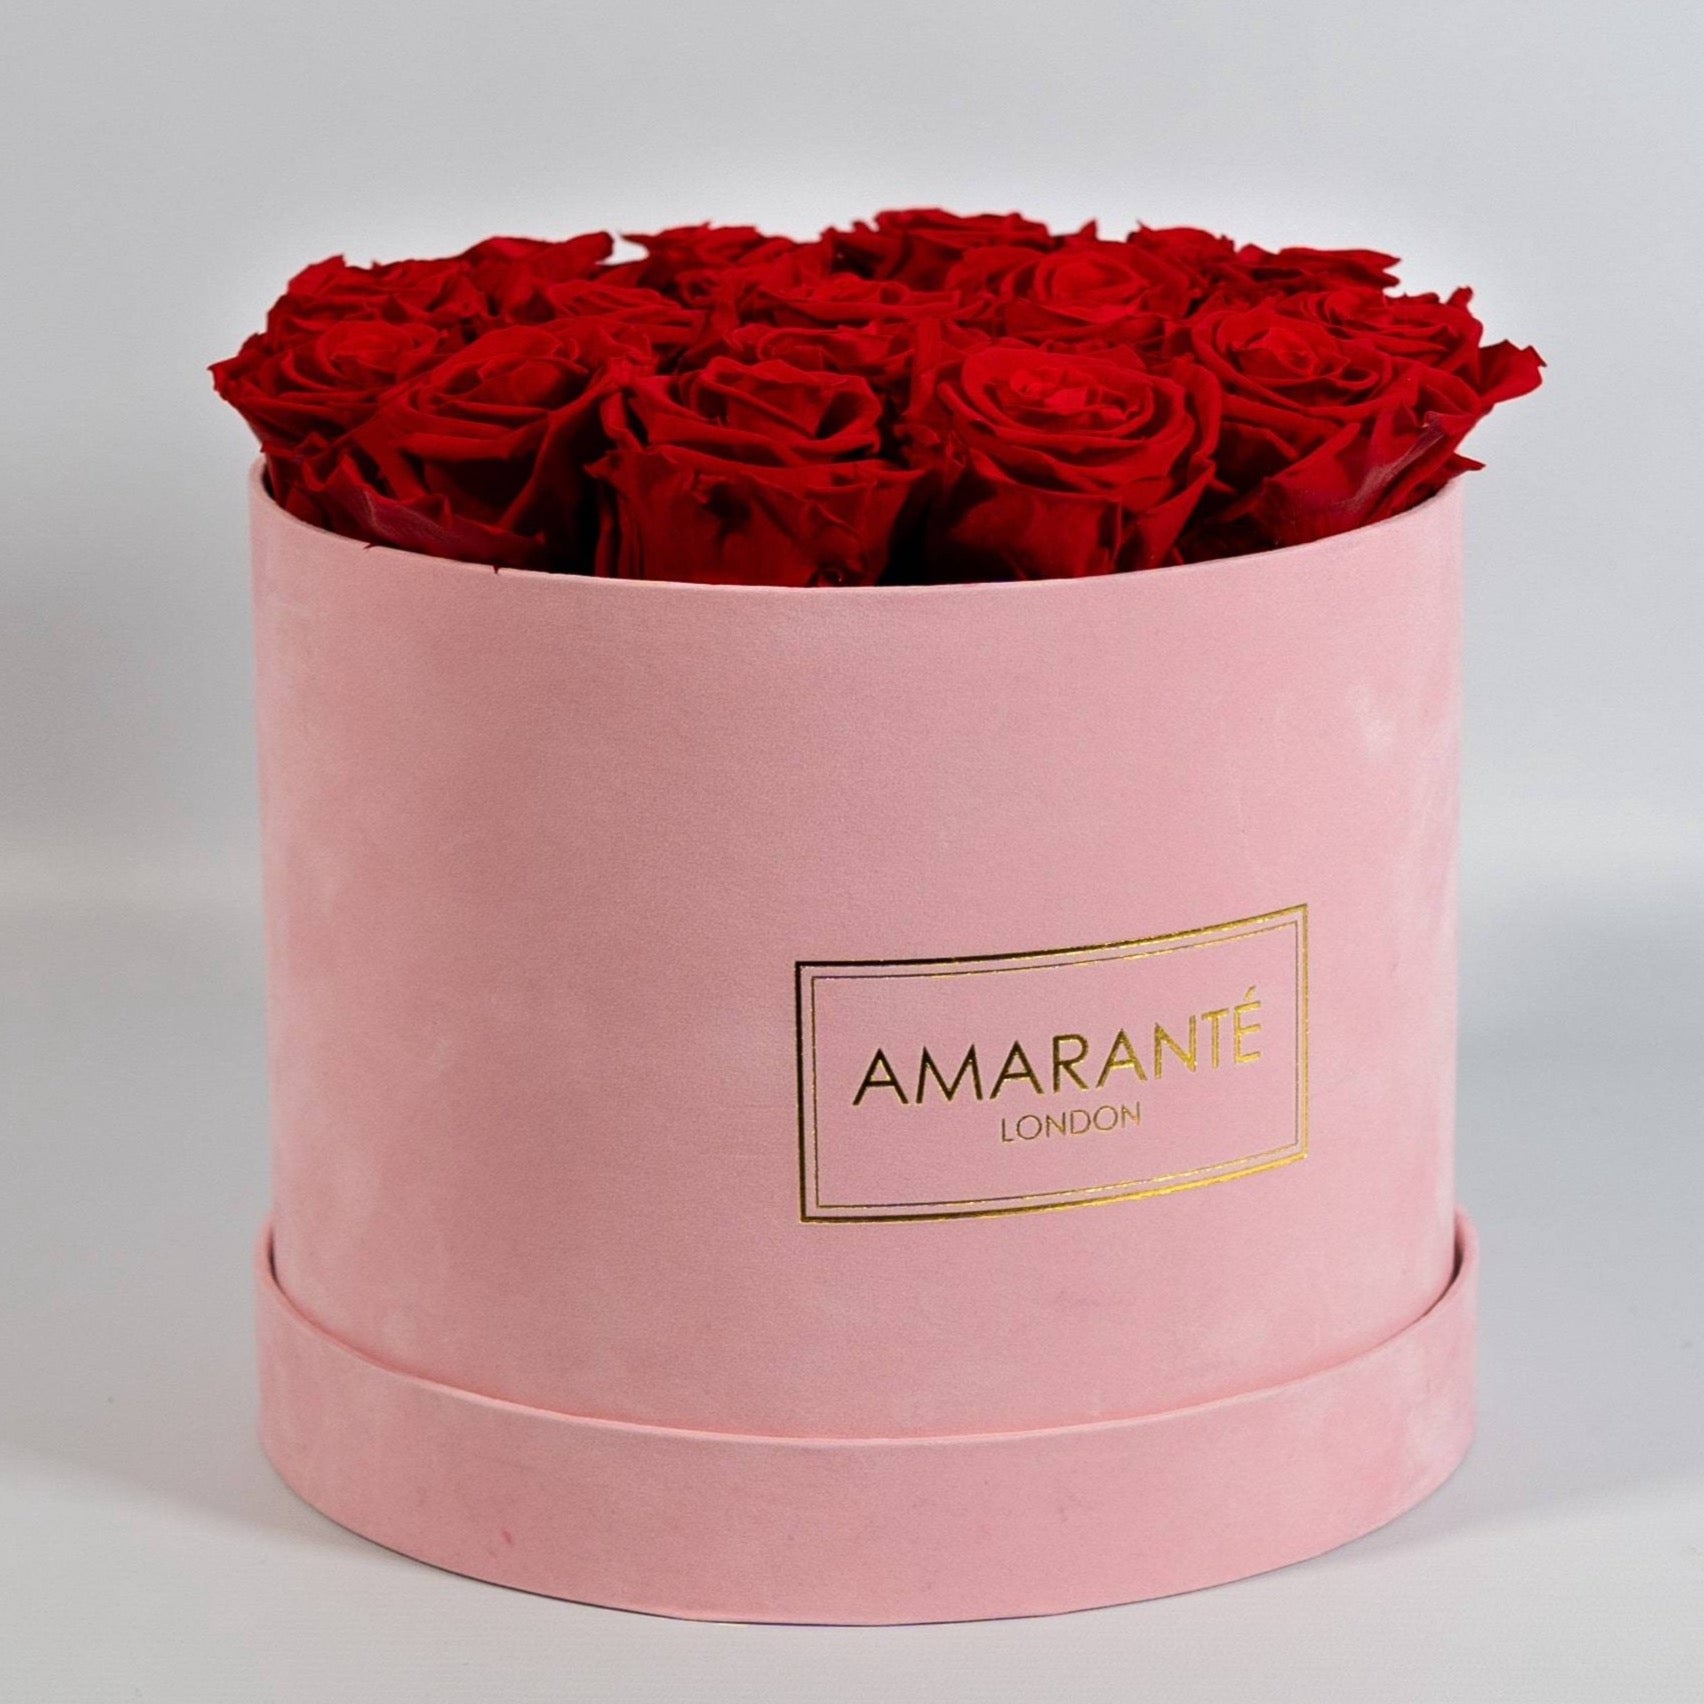 Divine red Roses in a stunning pink suede box 